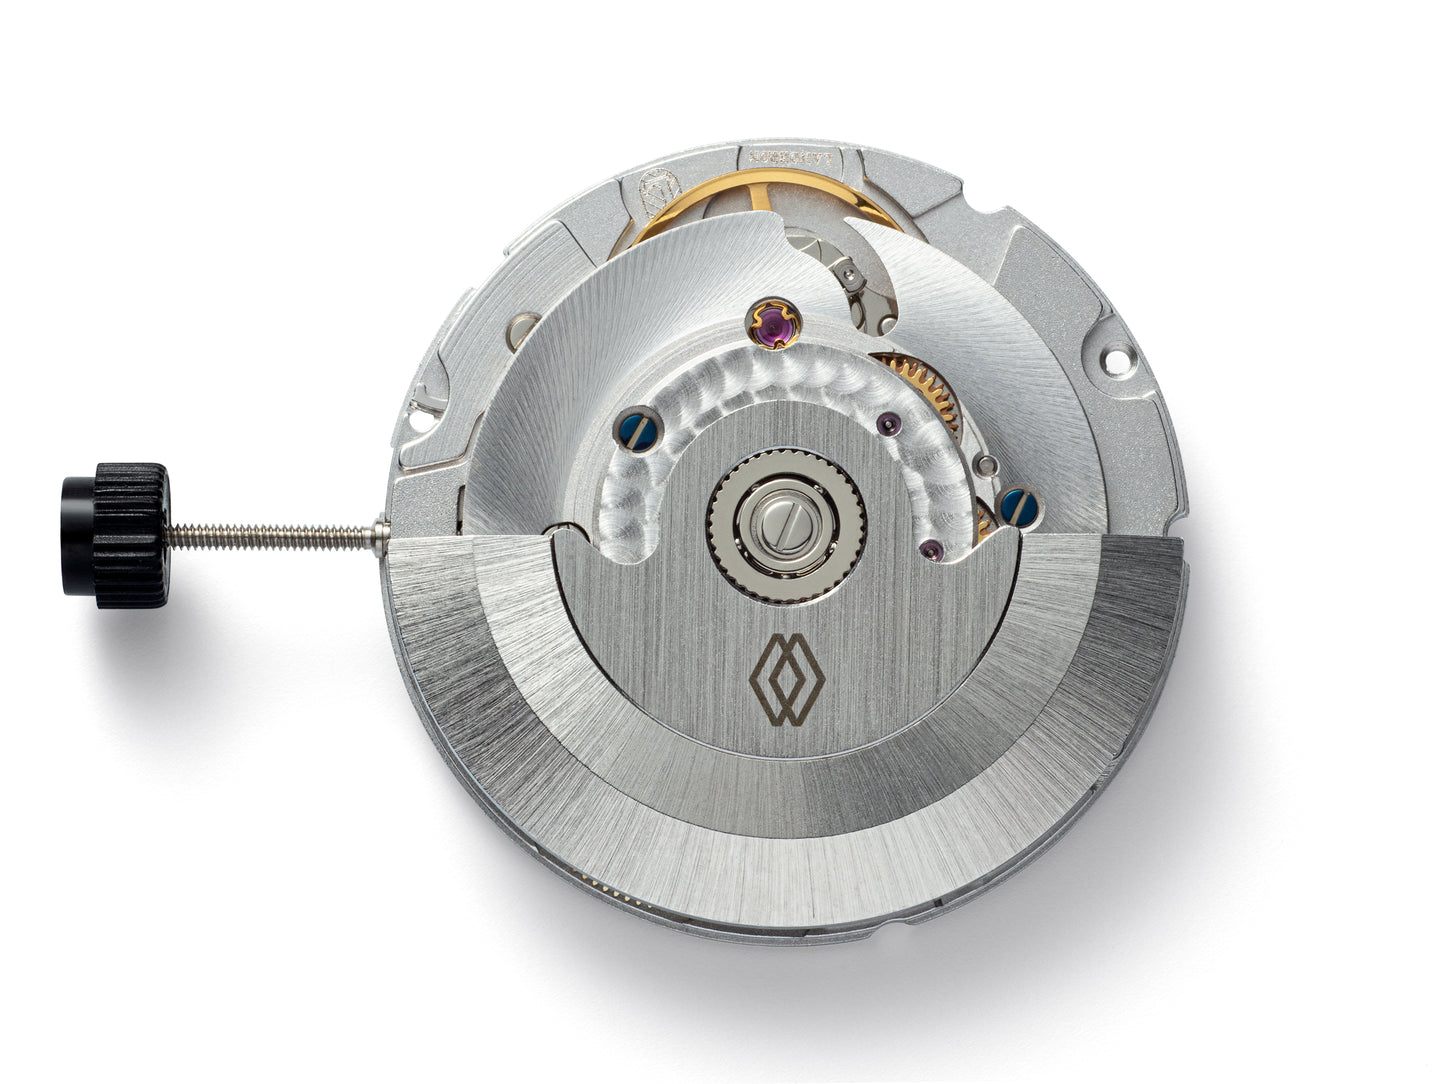 BWG-ISARIA-Automatic-watch-Swiss-Movement-Landeron-L24-manufacture-movement-detail-rotor